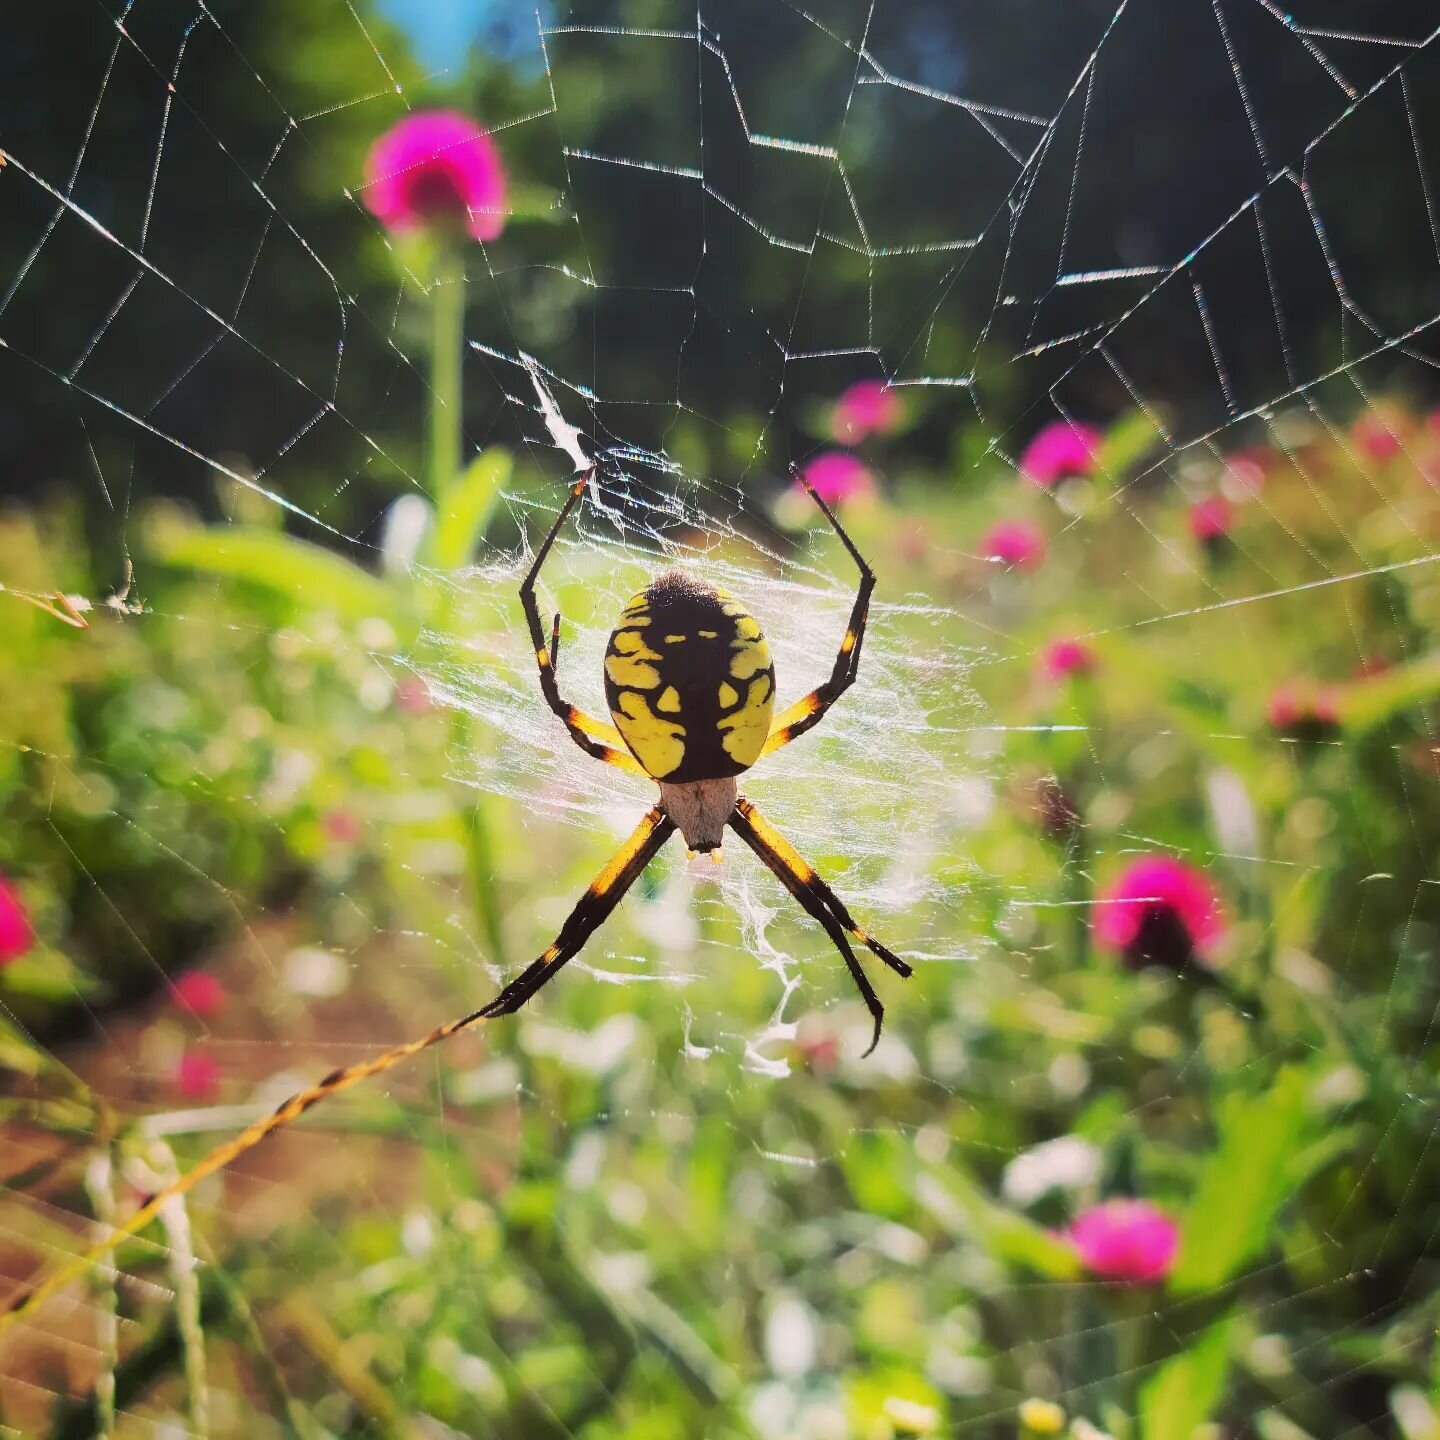 I almost grabbed this Yellow Garden Spider while cutting gomphrena.  I love finding creatures around the farm.  It makes the job I love that much better.

#grateful #flowerfarmer #gardenspider #gomphrena #mothernature #pestpatrol